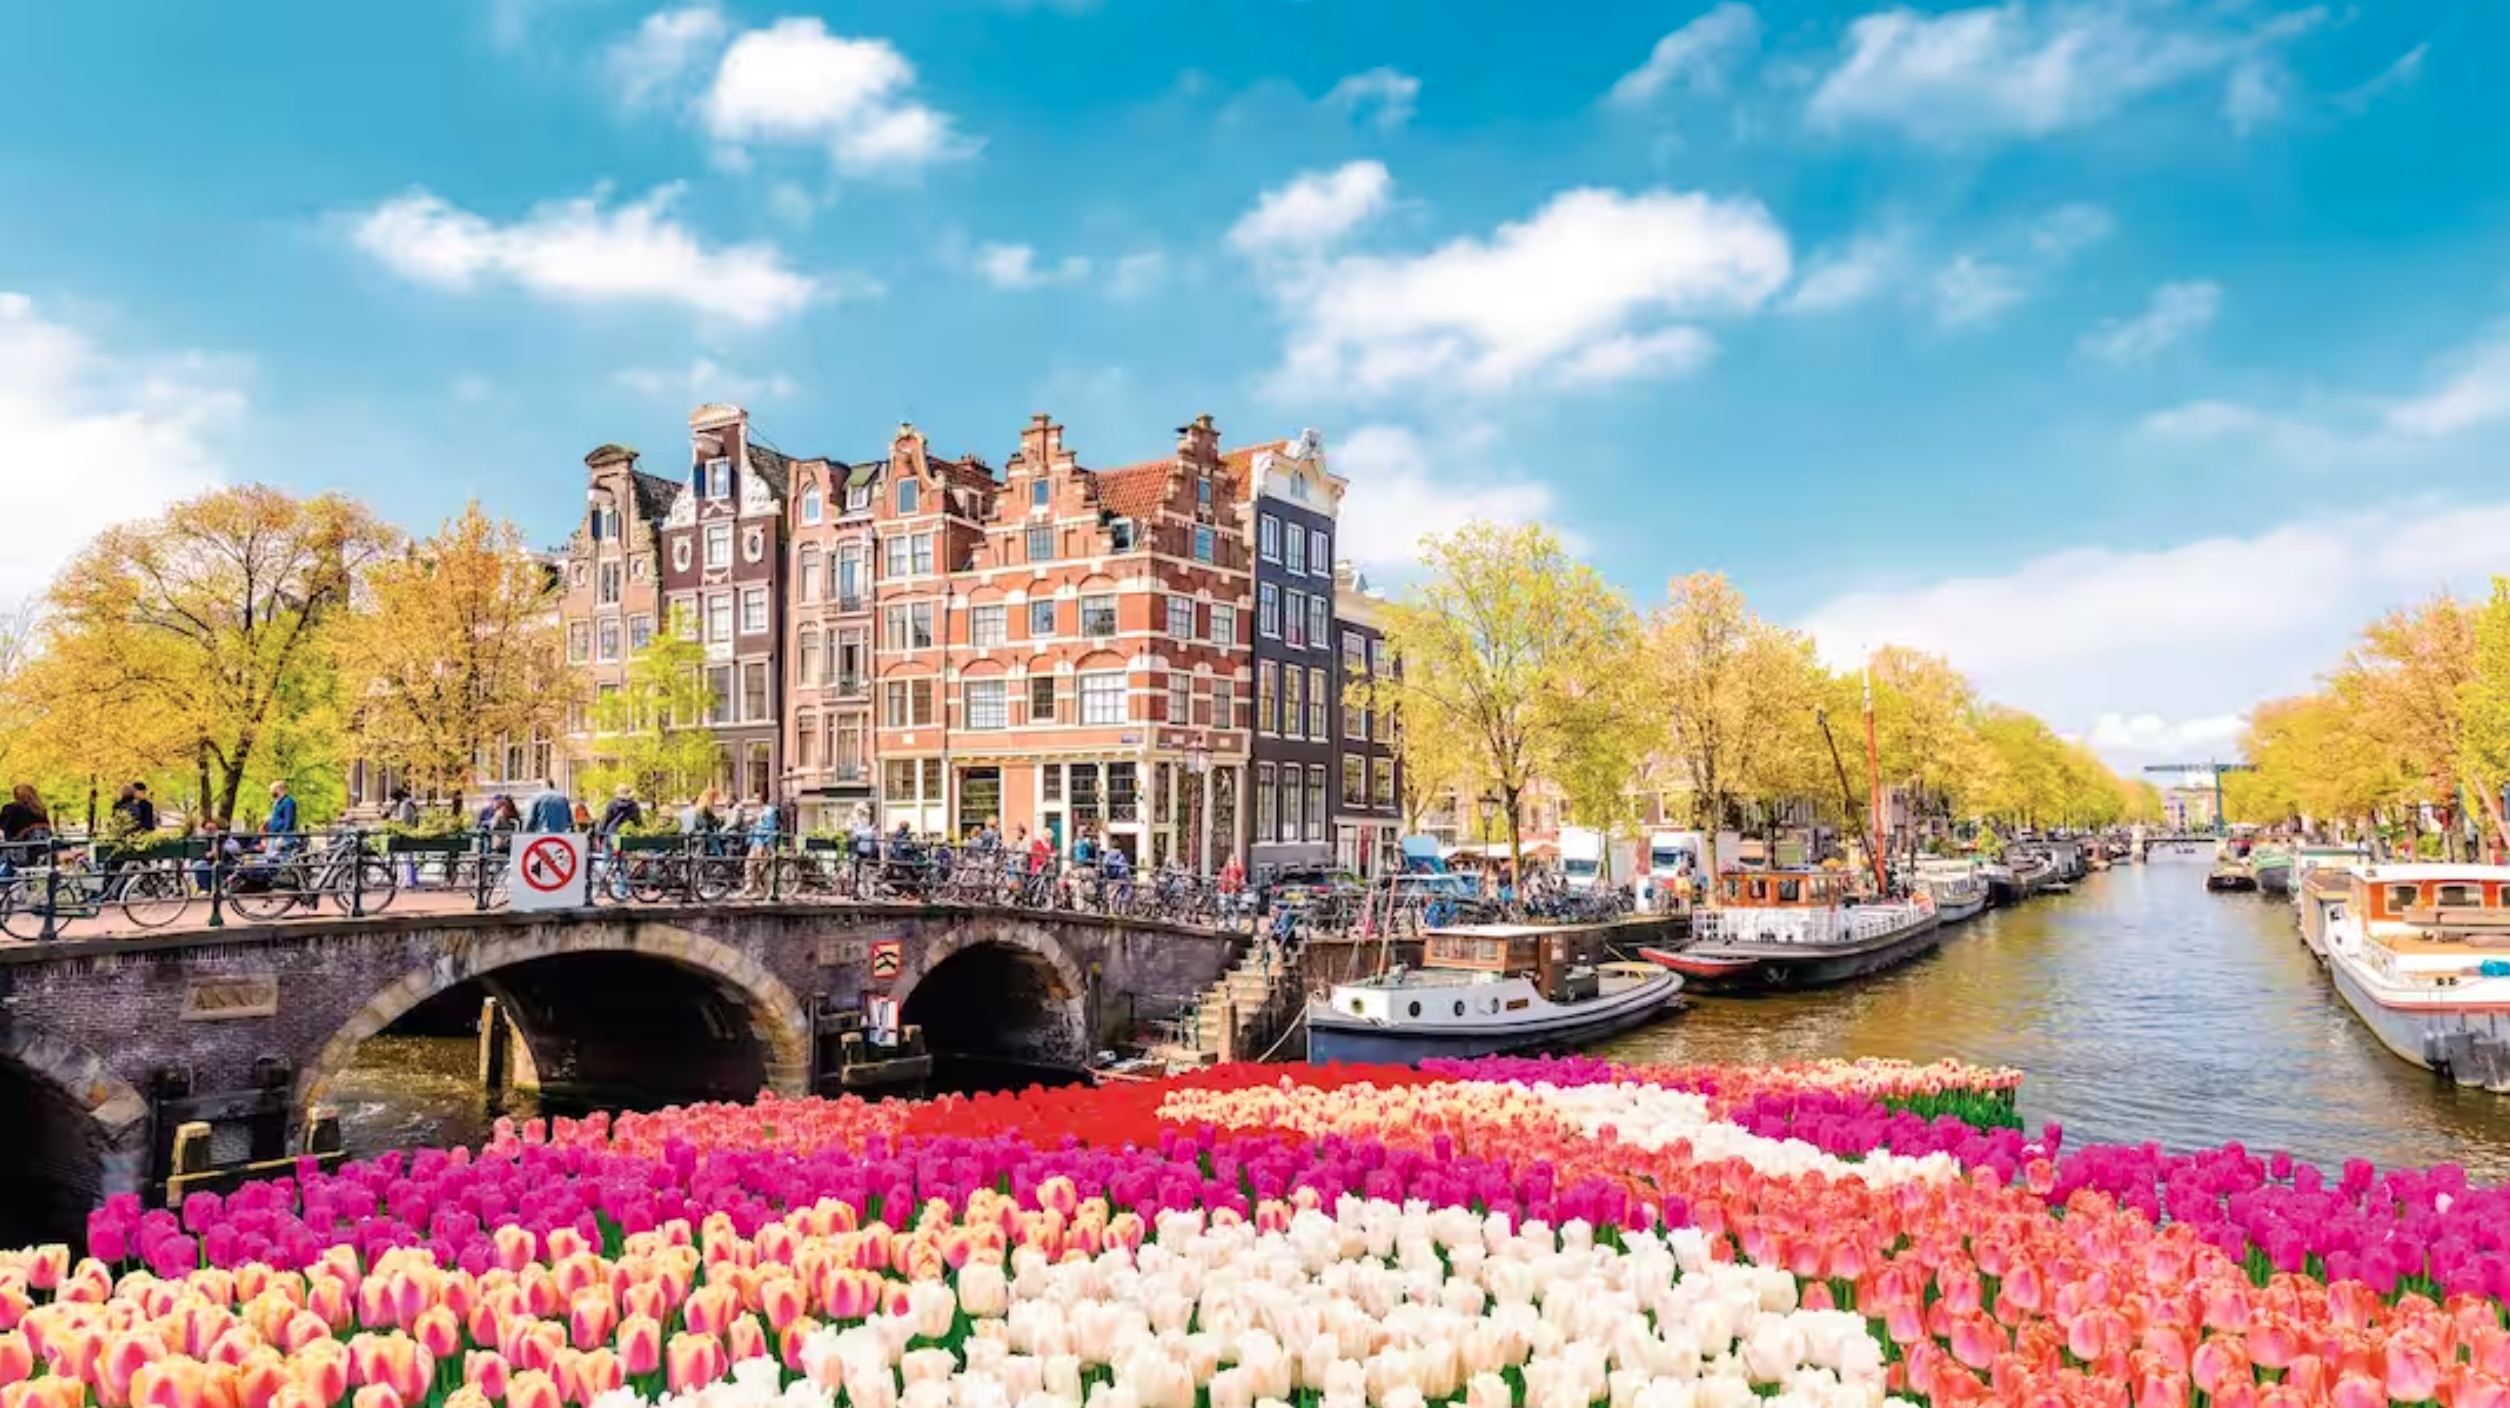 Tulips, canals and buildings in Amsterdam